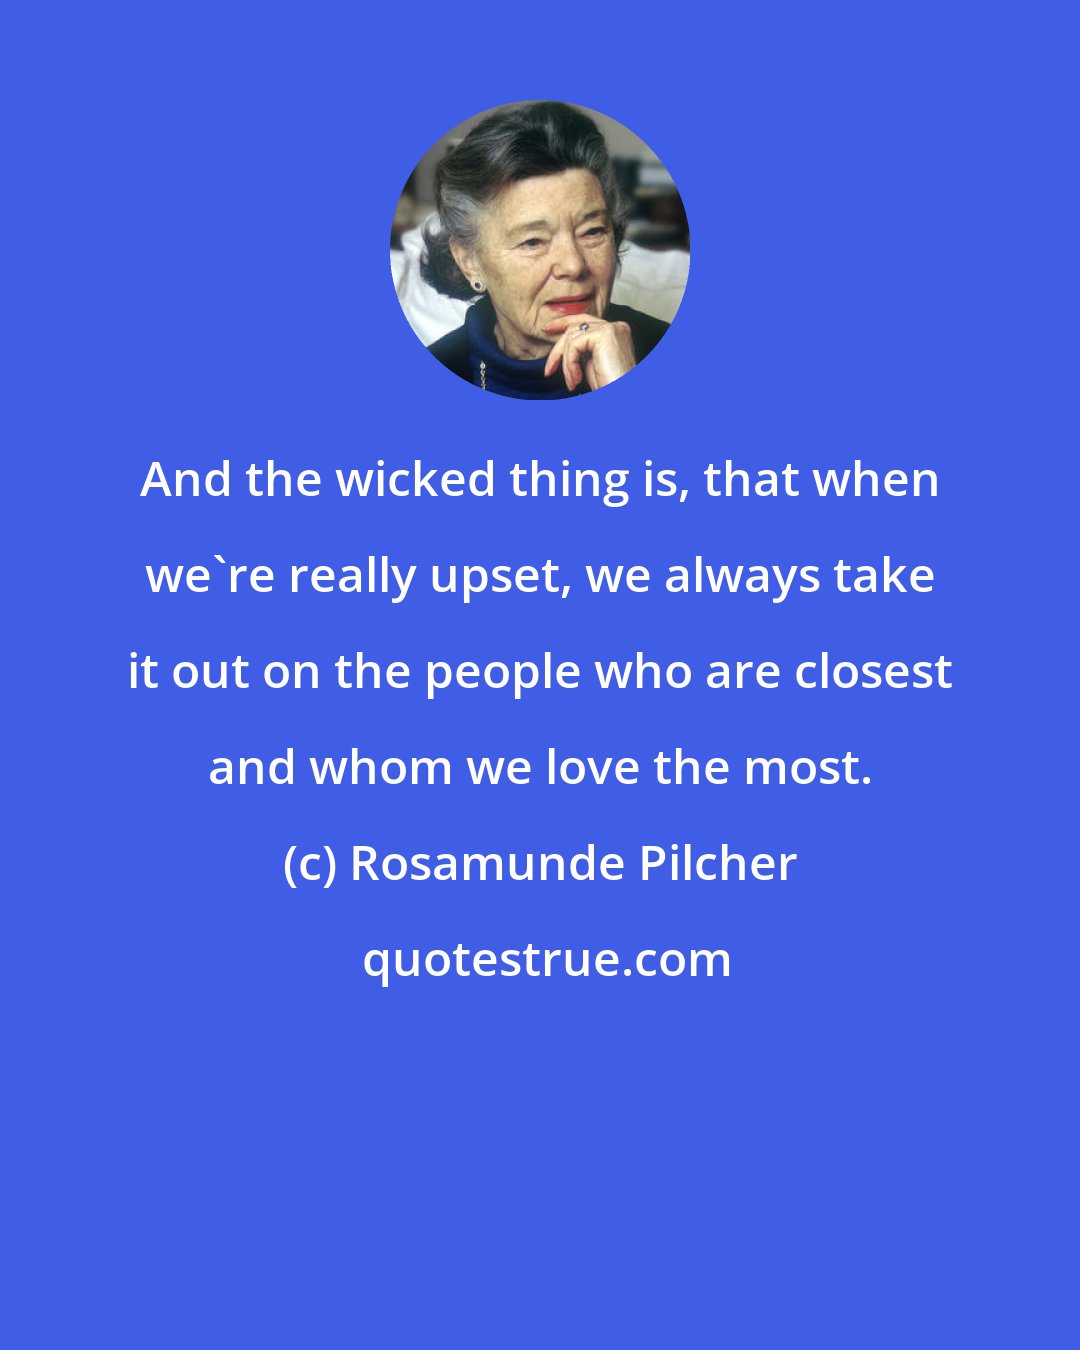 Rosamunde Pilcher: And the wicked thing is, that when we're really upset, we always take it out on the people who are closest and whom we love the most.